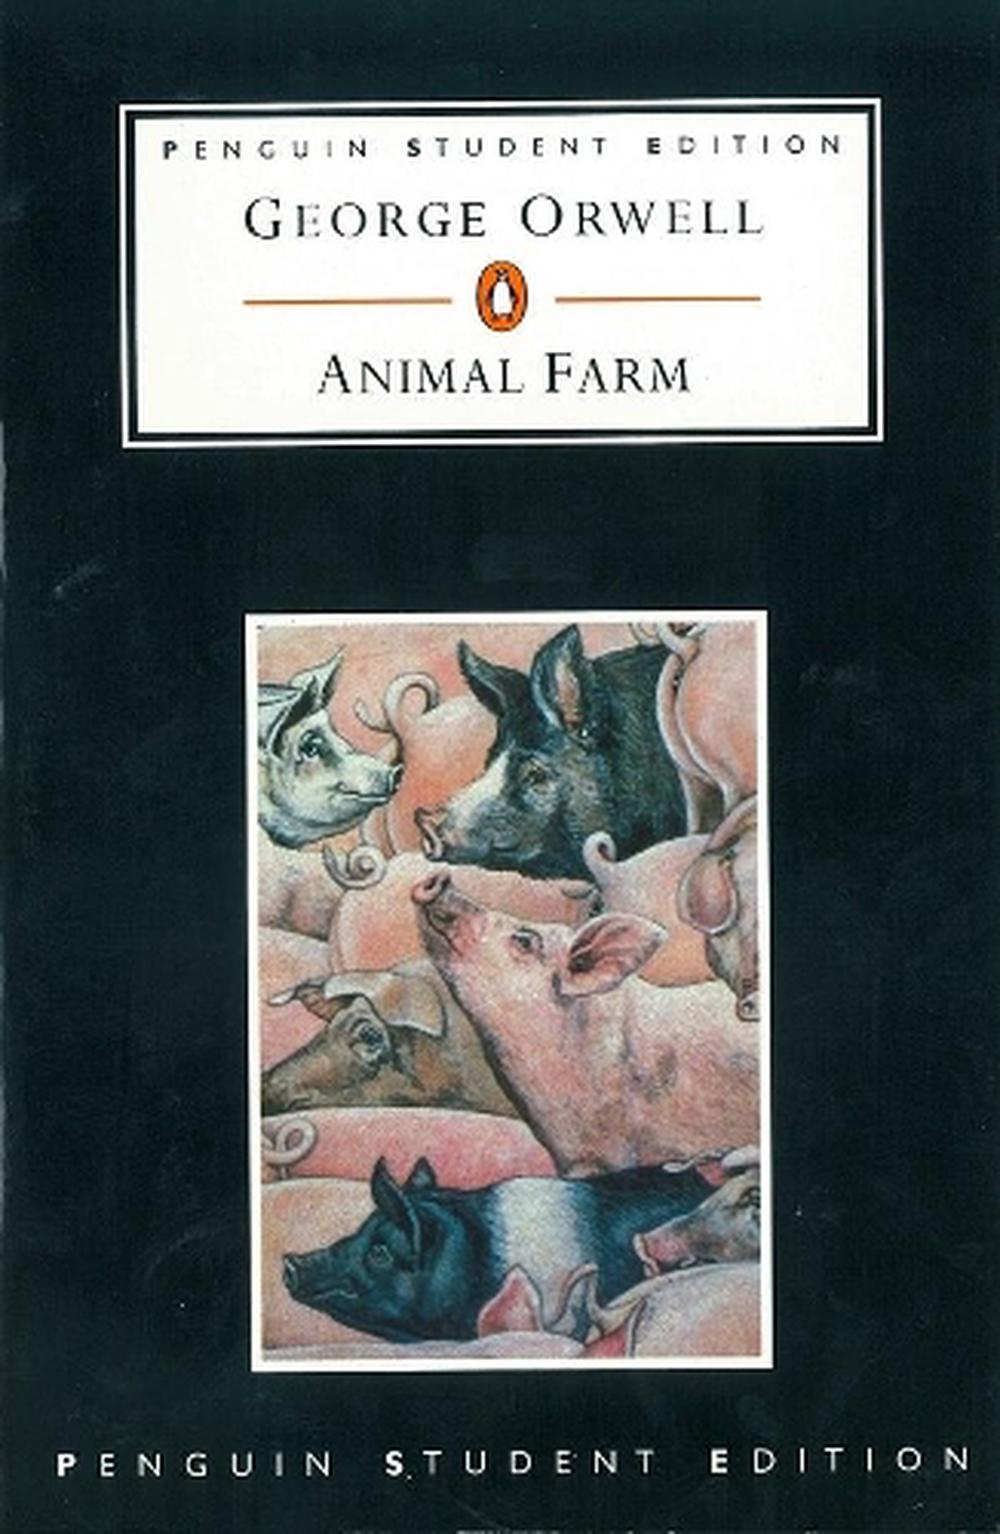 1984 and animal farm book and cassette george orwell